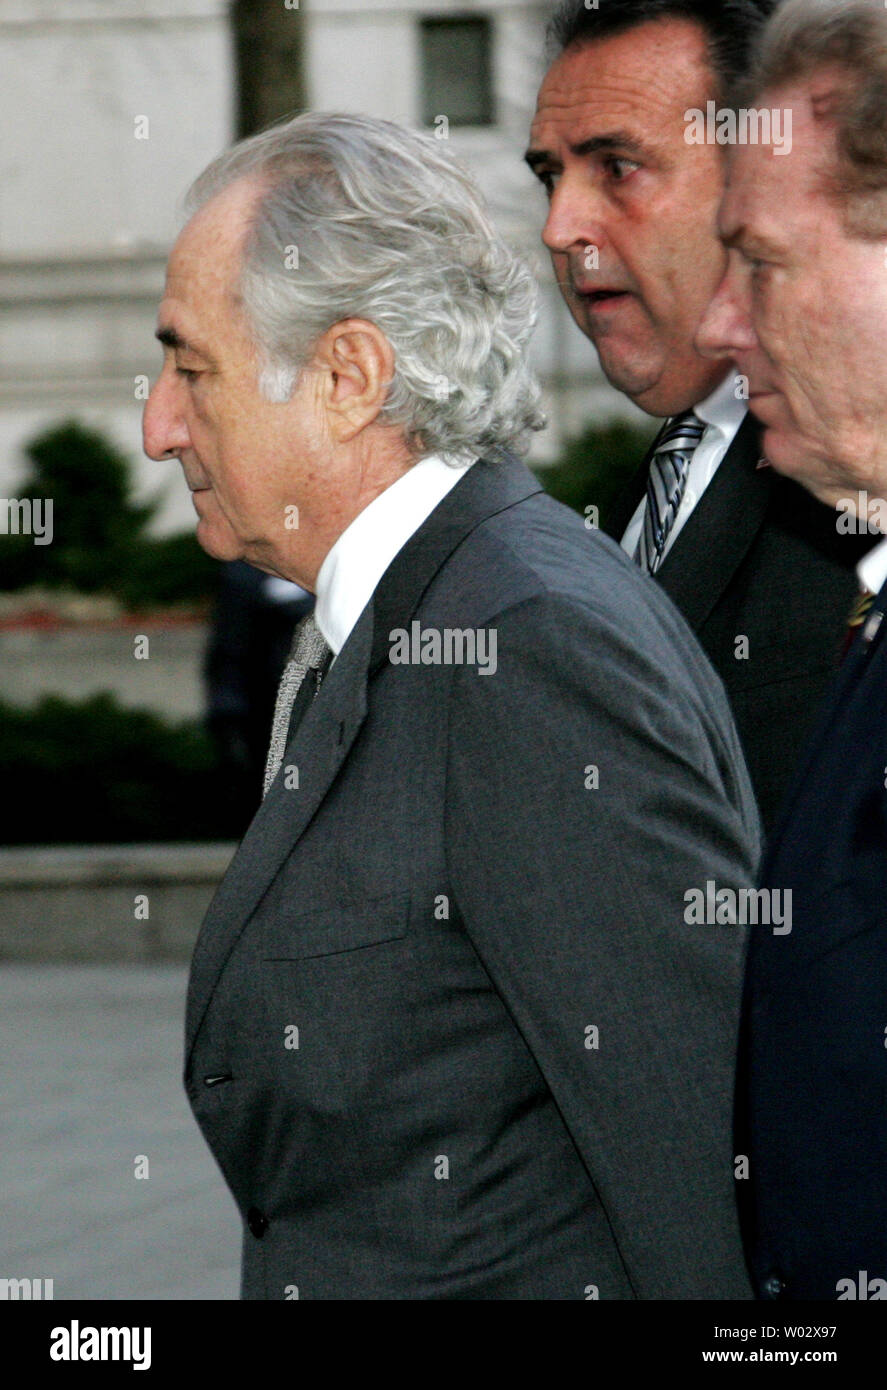 Bernard Madoff arrives at Federal Court where he is expected to plead guilty to securities fraud charges on March 12, 2009 in New York. Victims will also be in court to testify against the disgraced financier who is accused of masterminding a $50 billion Ponzi scheme. UPI/Monika Graff Stock Photo